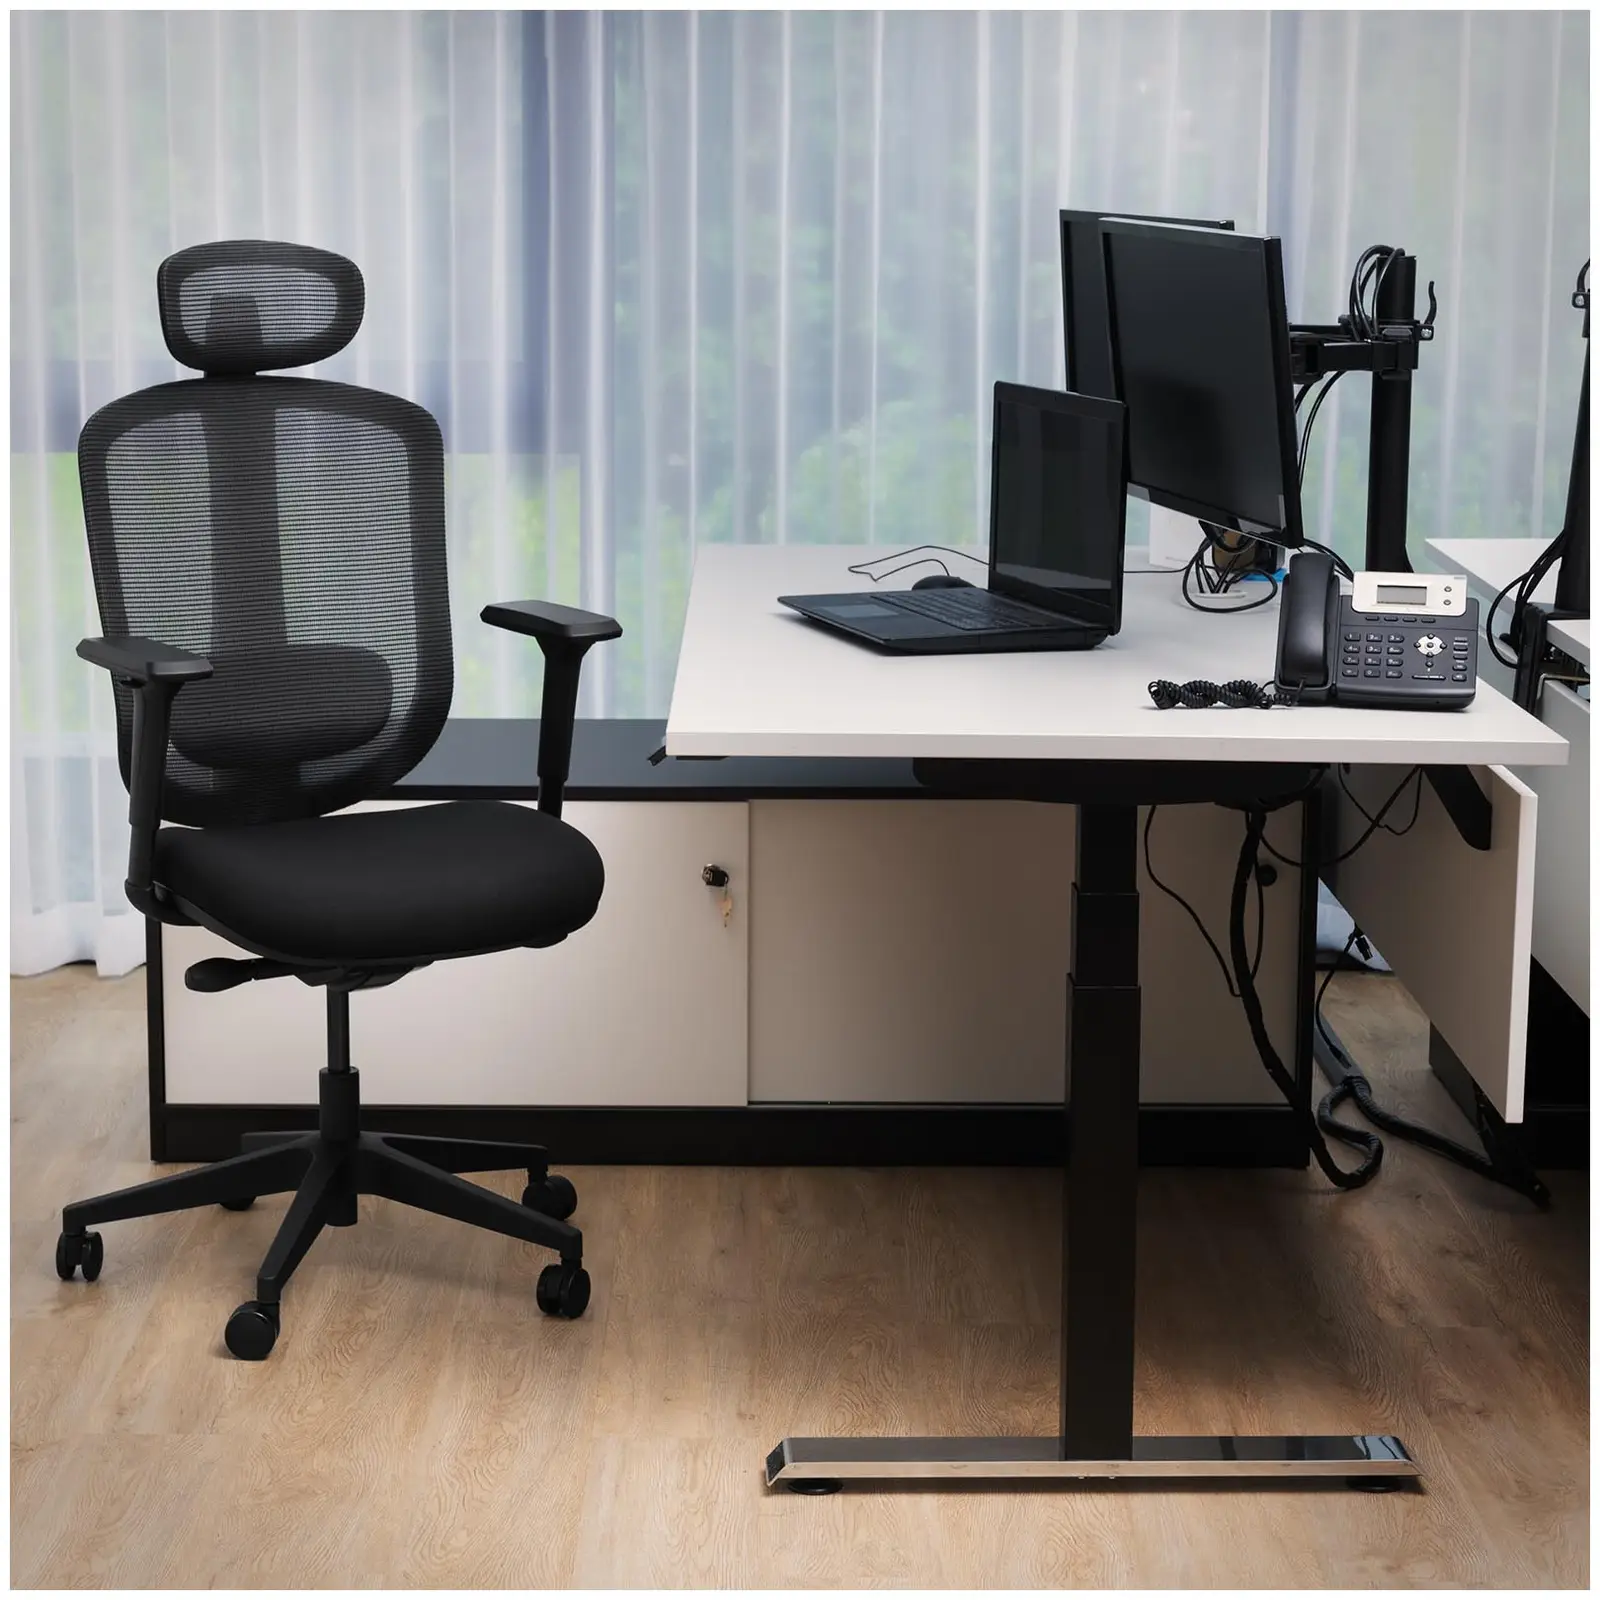 Office Chair - mesh back - headrest and lumbar support - 150 kg